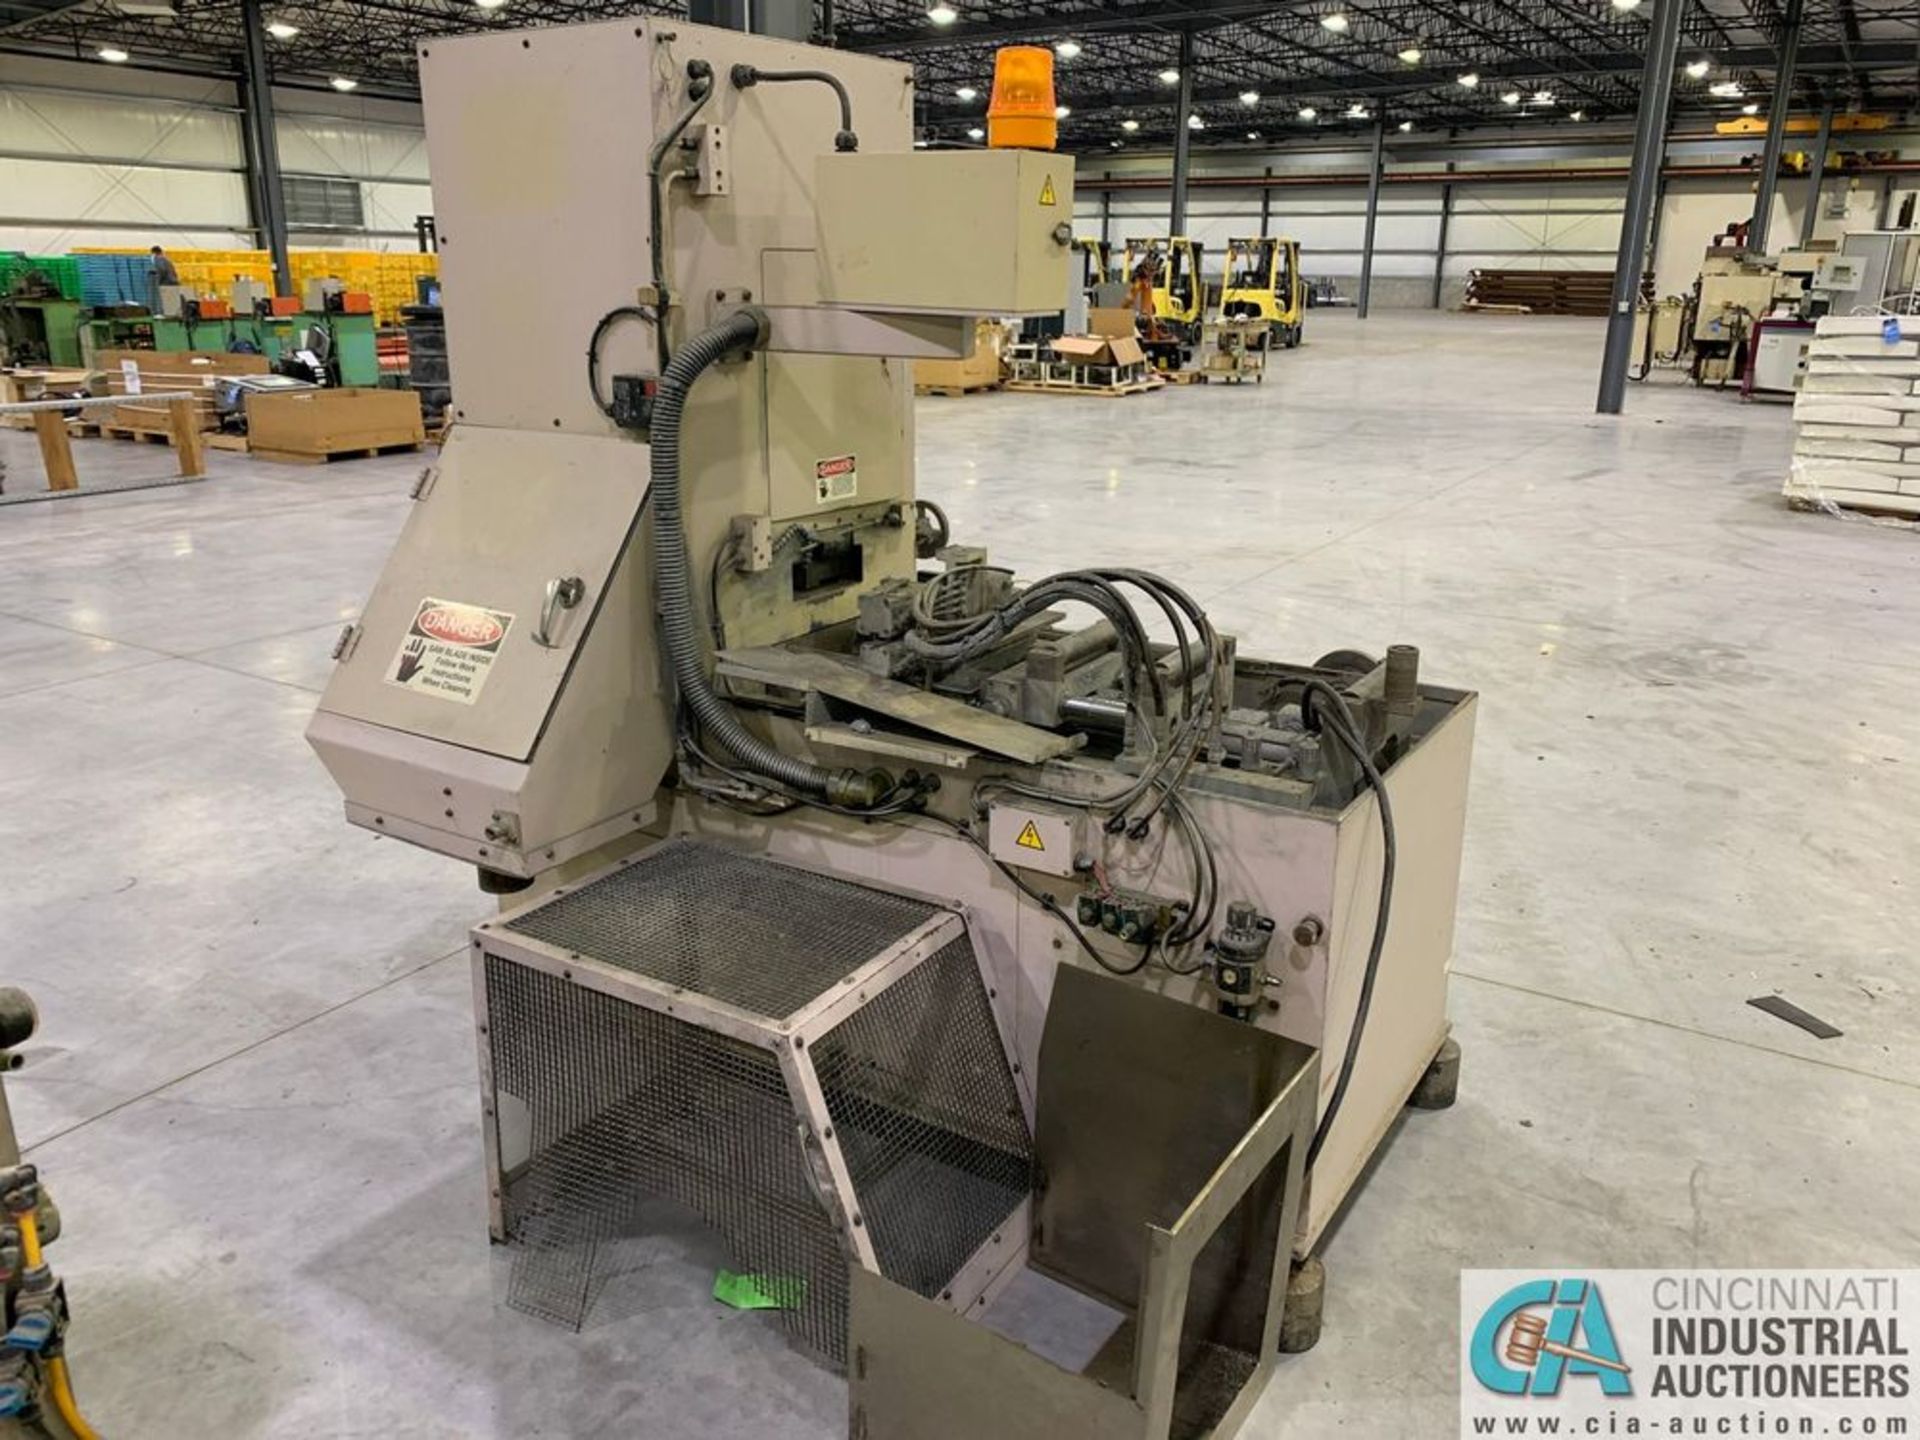 ACTIVE-FIVE NO. NX-400-AT CUT-OFF SAW (NOT IN SERVICE) - Image 7 of 9